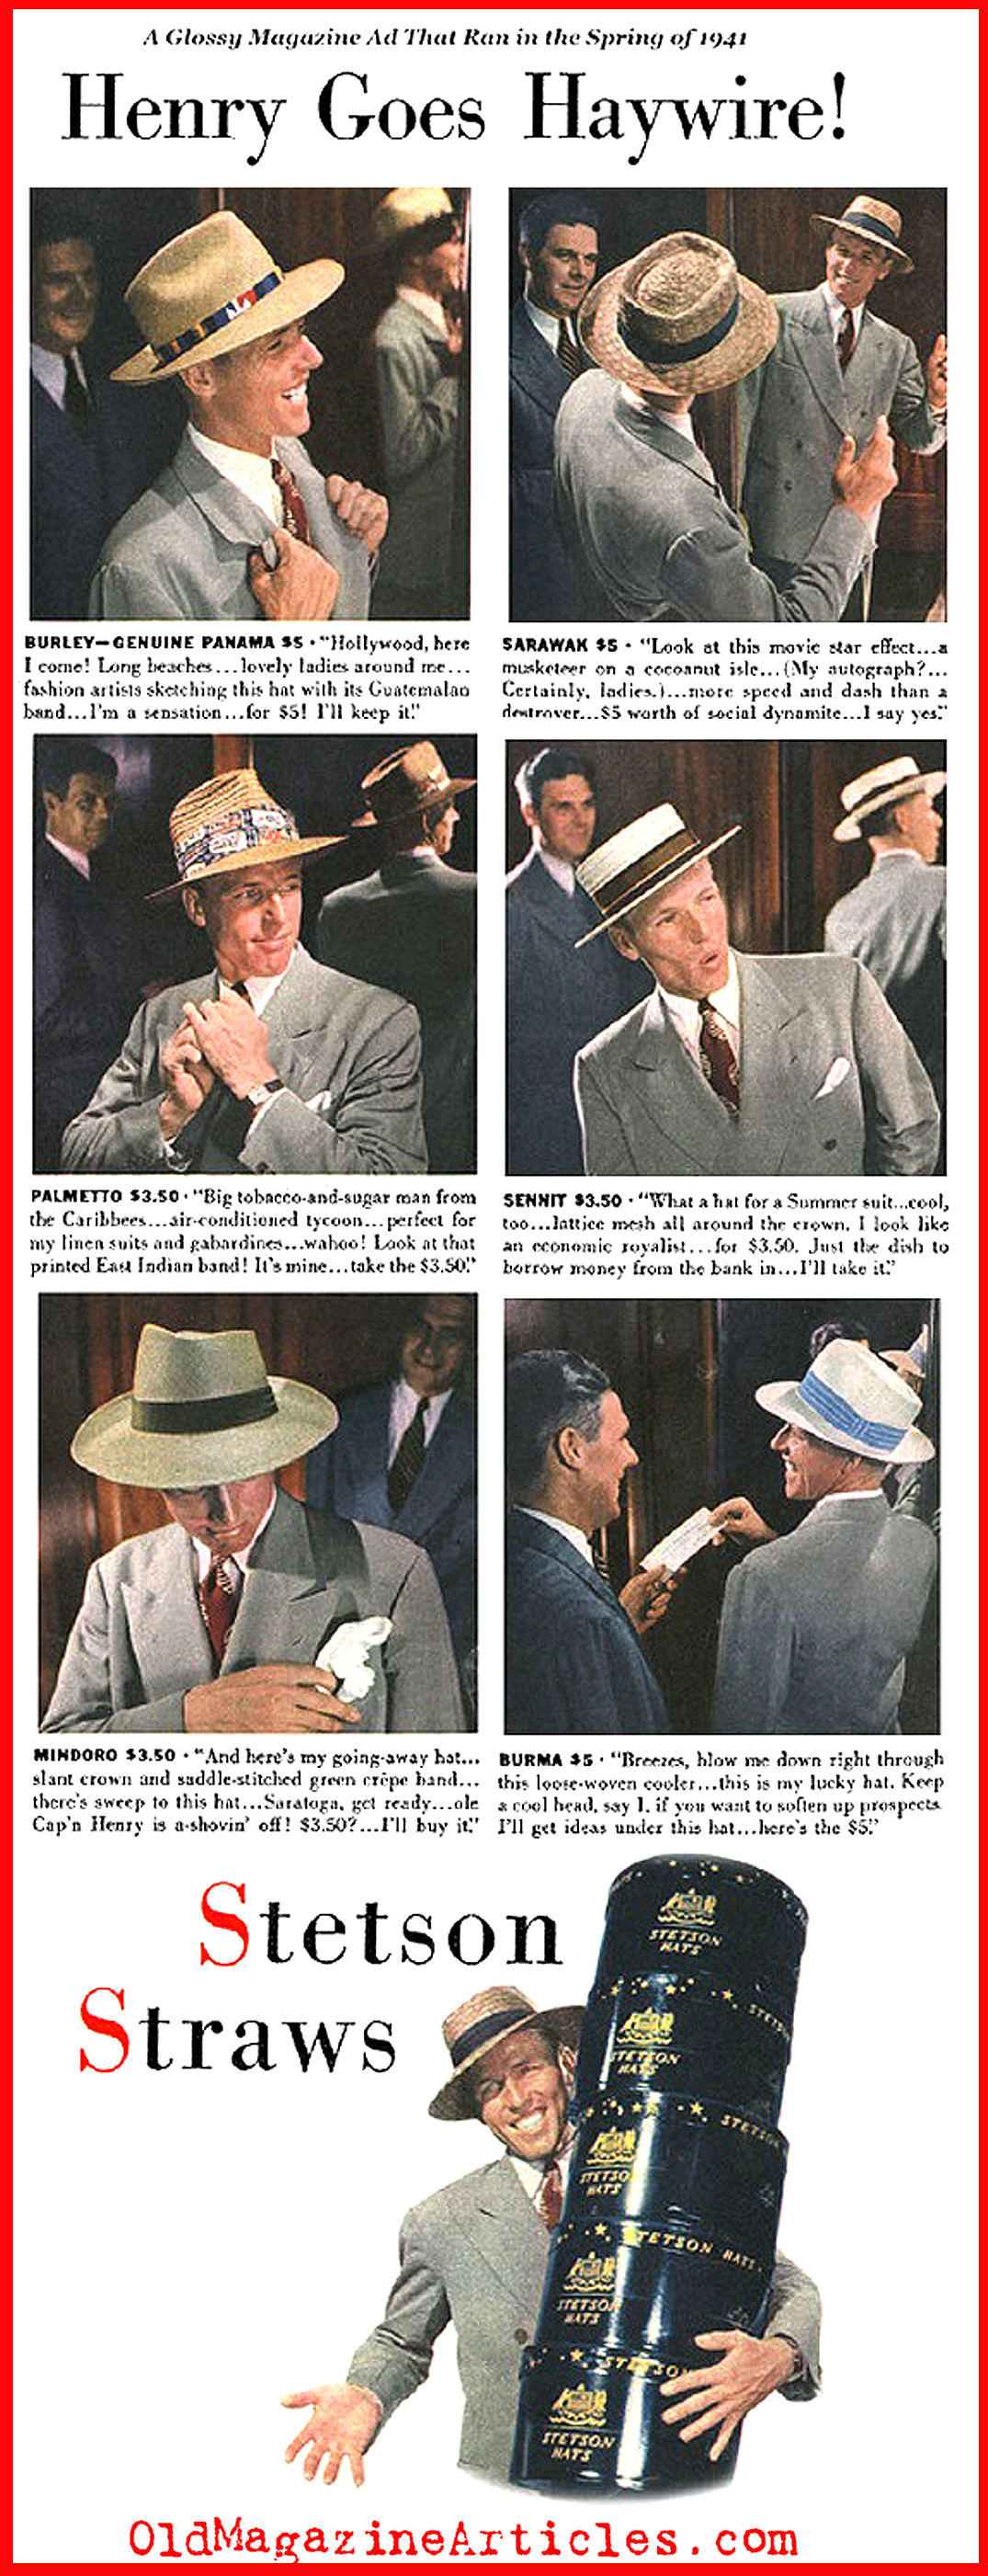 Men's Straw Hats from the Early Forties (From a 1941 Magazine Ad)